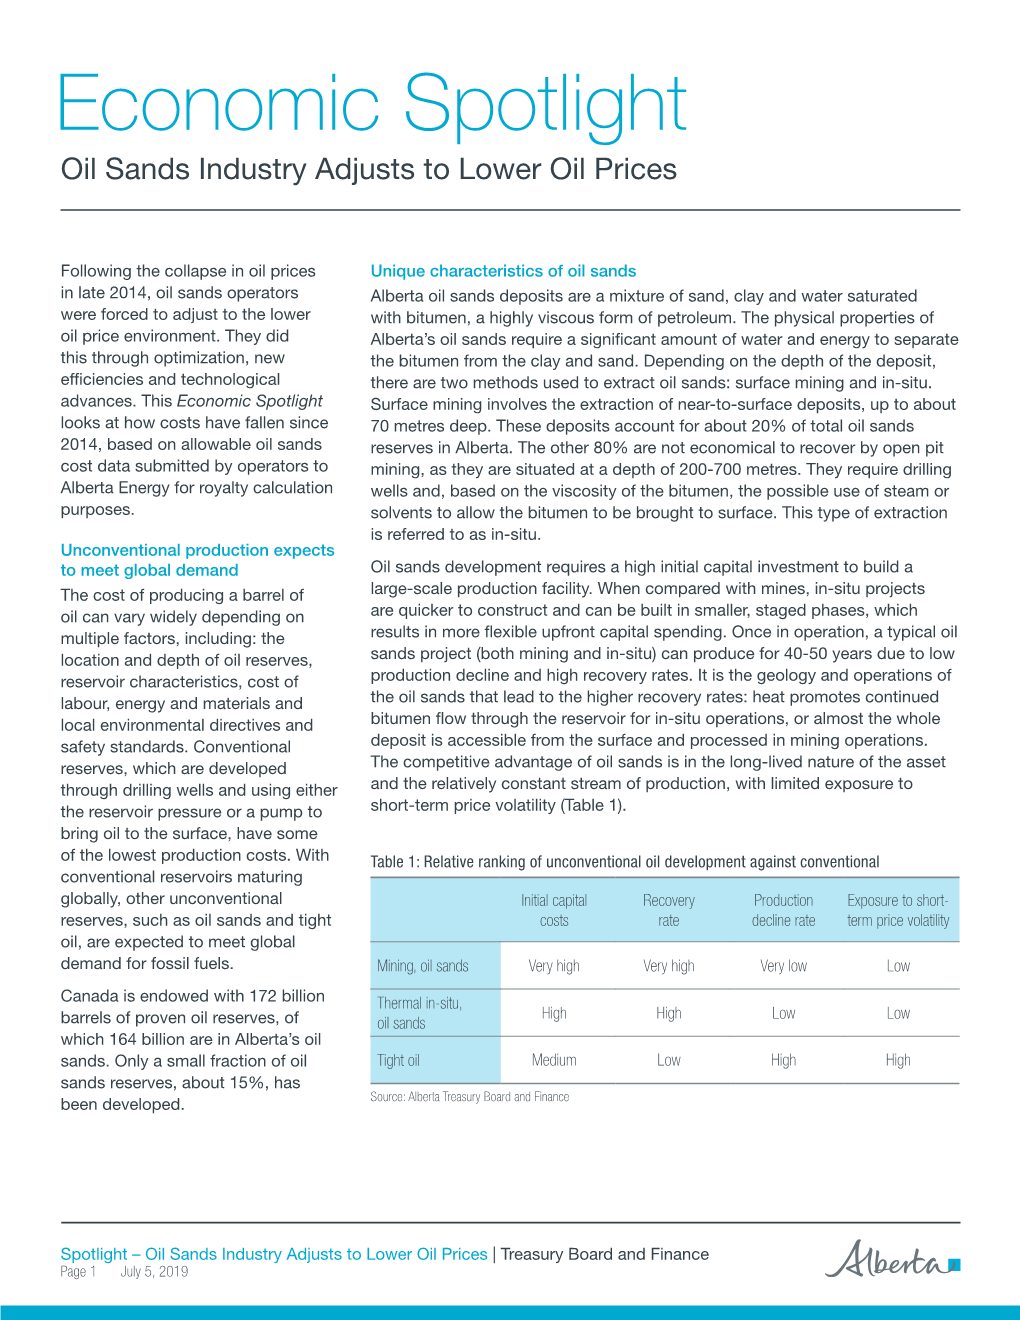 2019 June – Oil Sands Industry Adjusts to Lower Oil Prices